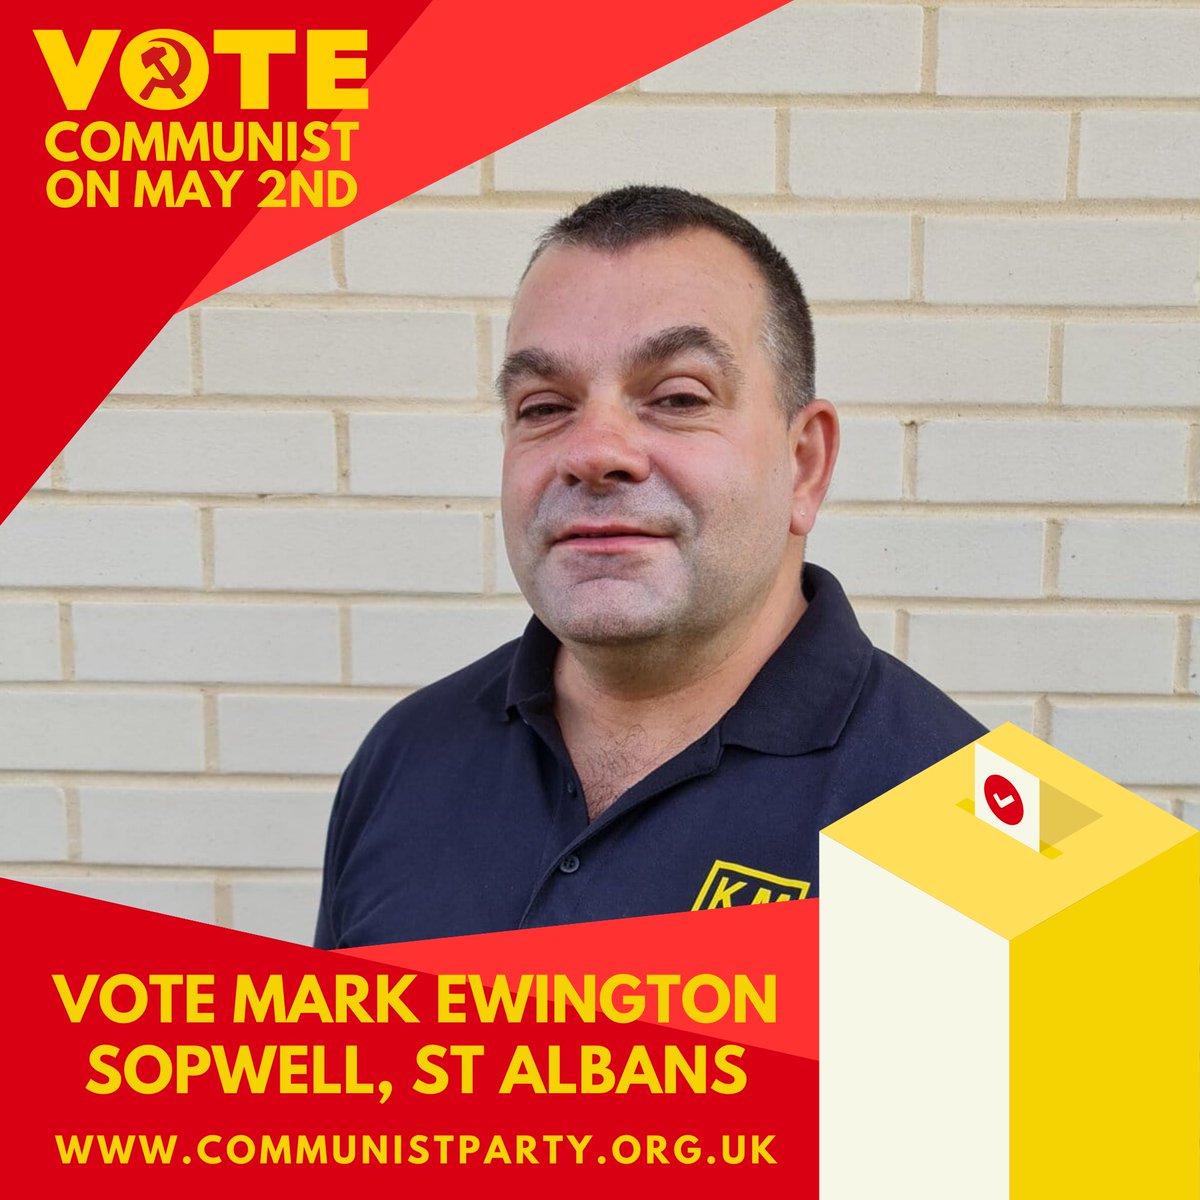 Vote, Campaign, Join: for the working class! #VoteCommunist on May 2nd 🗳️🚩 ‘Sopwell needs socialism!’ - three time candidate and local community activist Mark Ewington from @CPB_3CC says: “So many people are having a hard time just making ends meet. Child poverty is